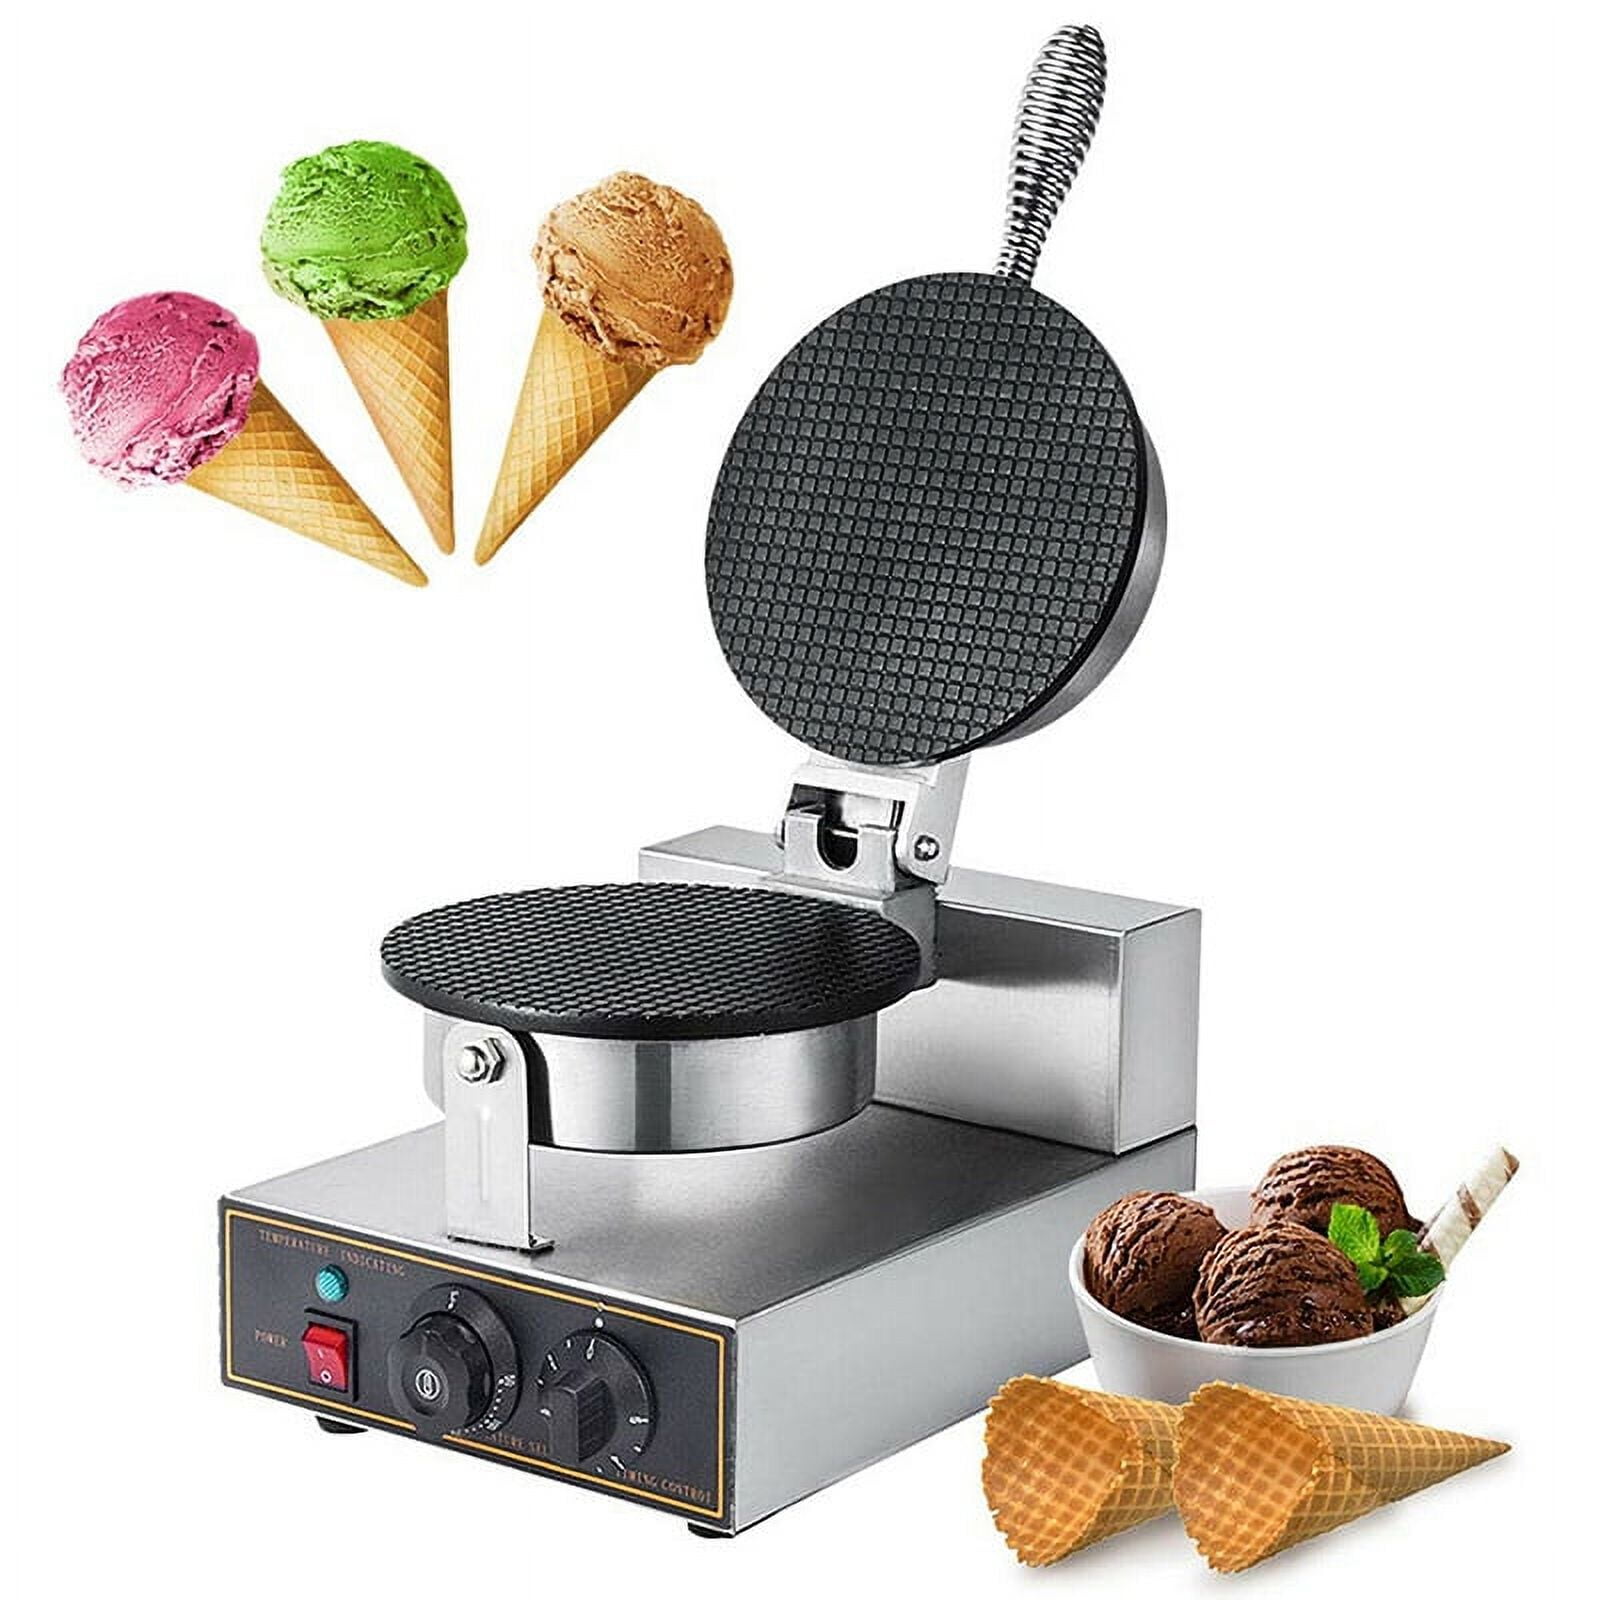 24 Moulds Electric Wafer Ice Cream Cup Maker Machine